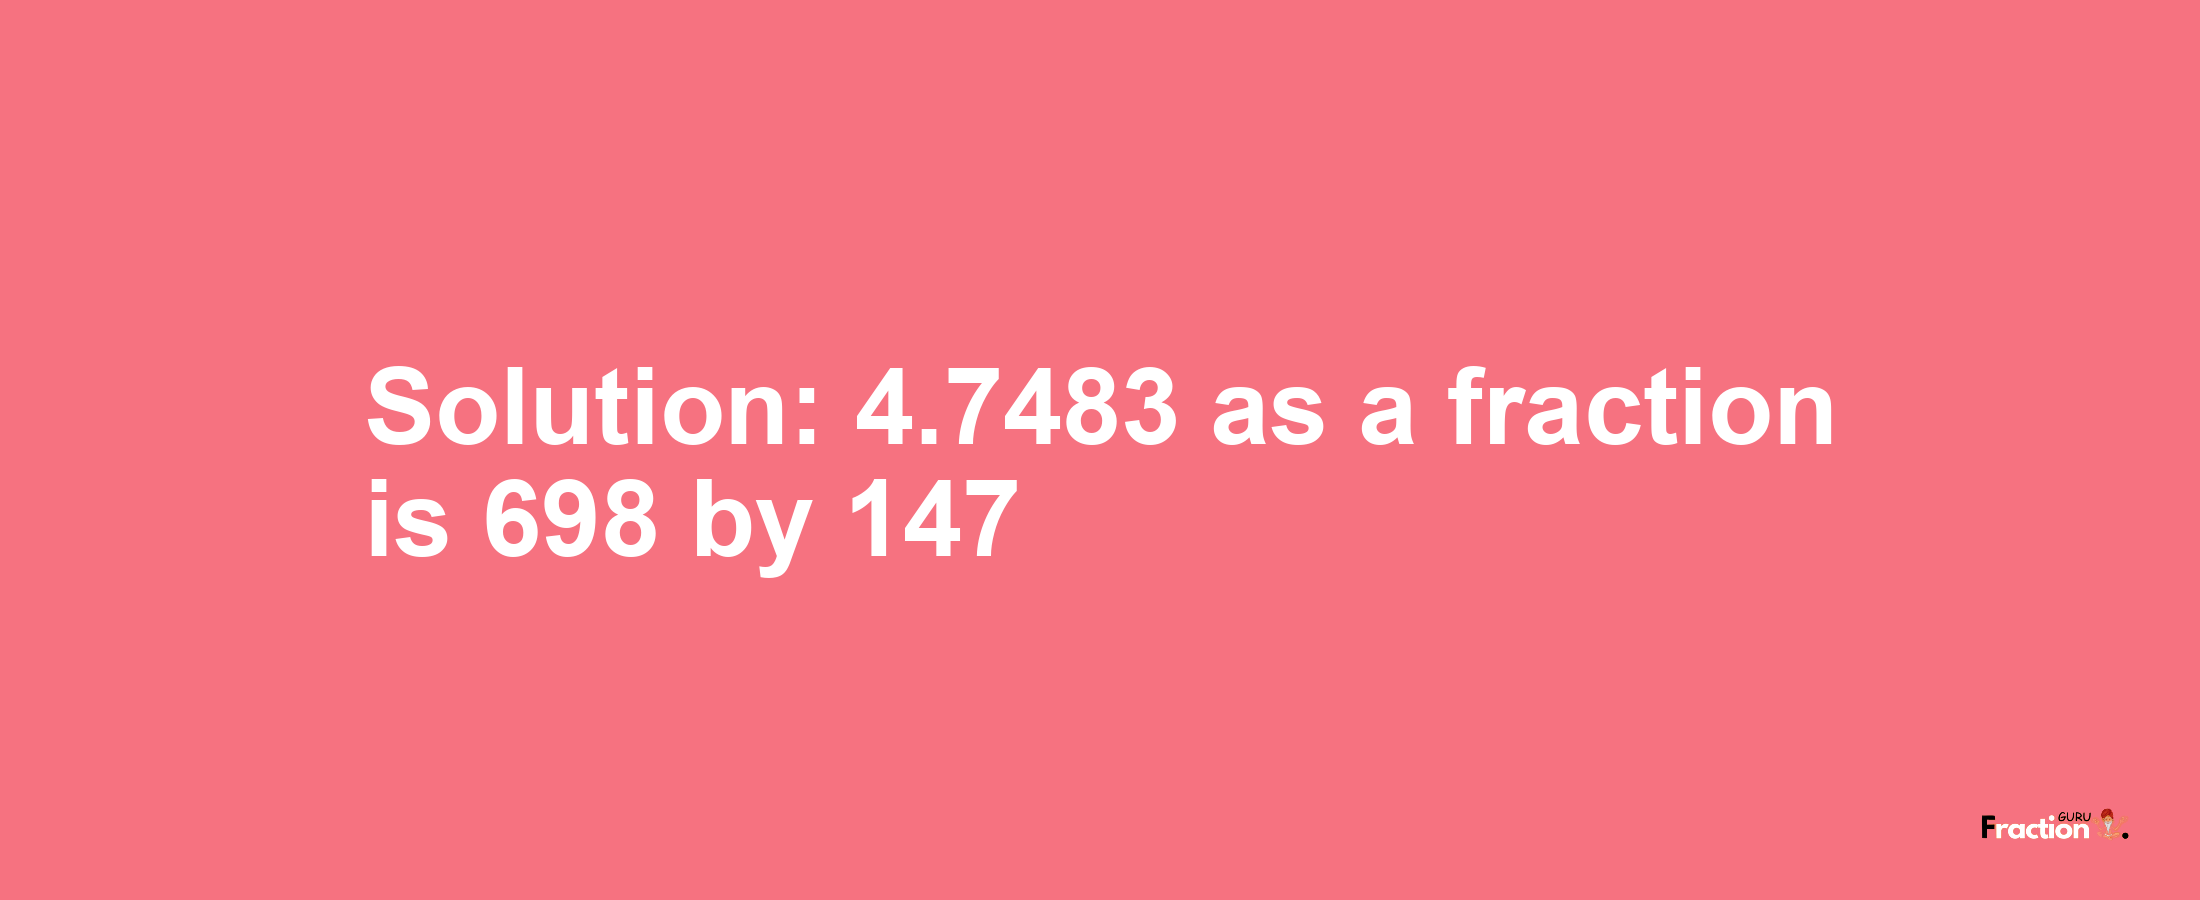 Solution:4.7483 as a fraction is 698/147